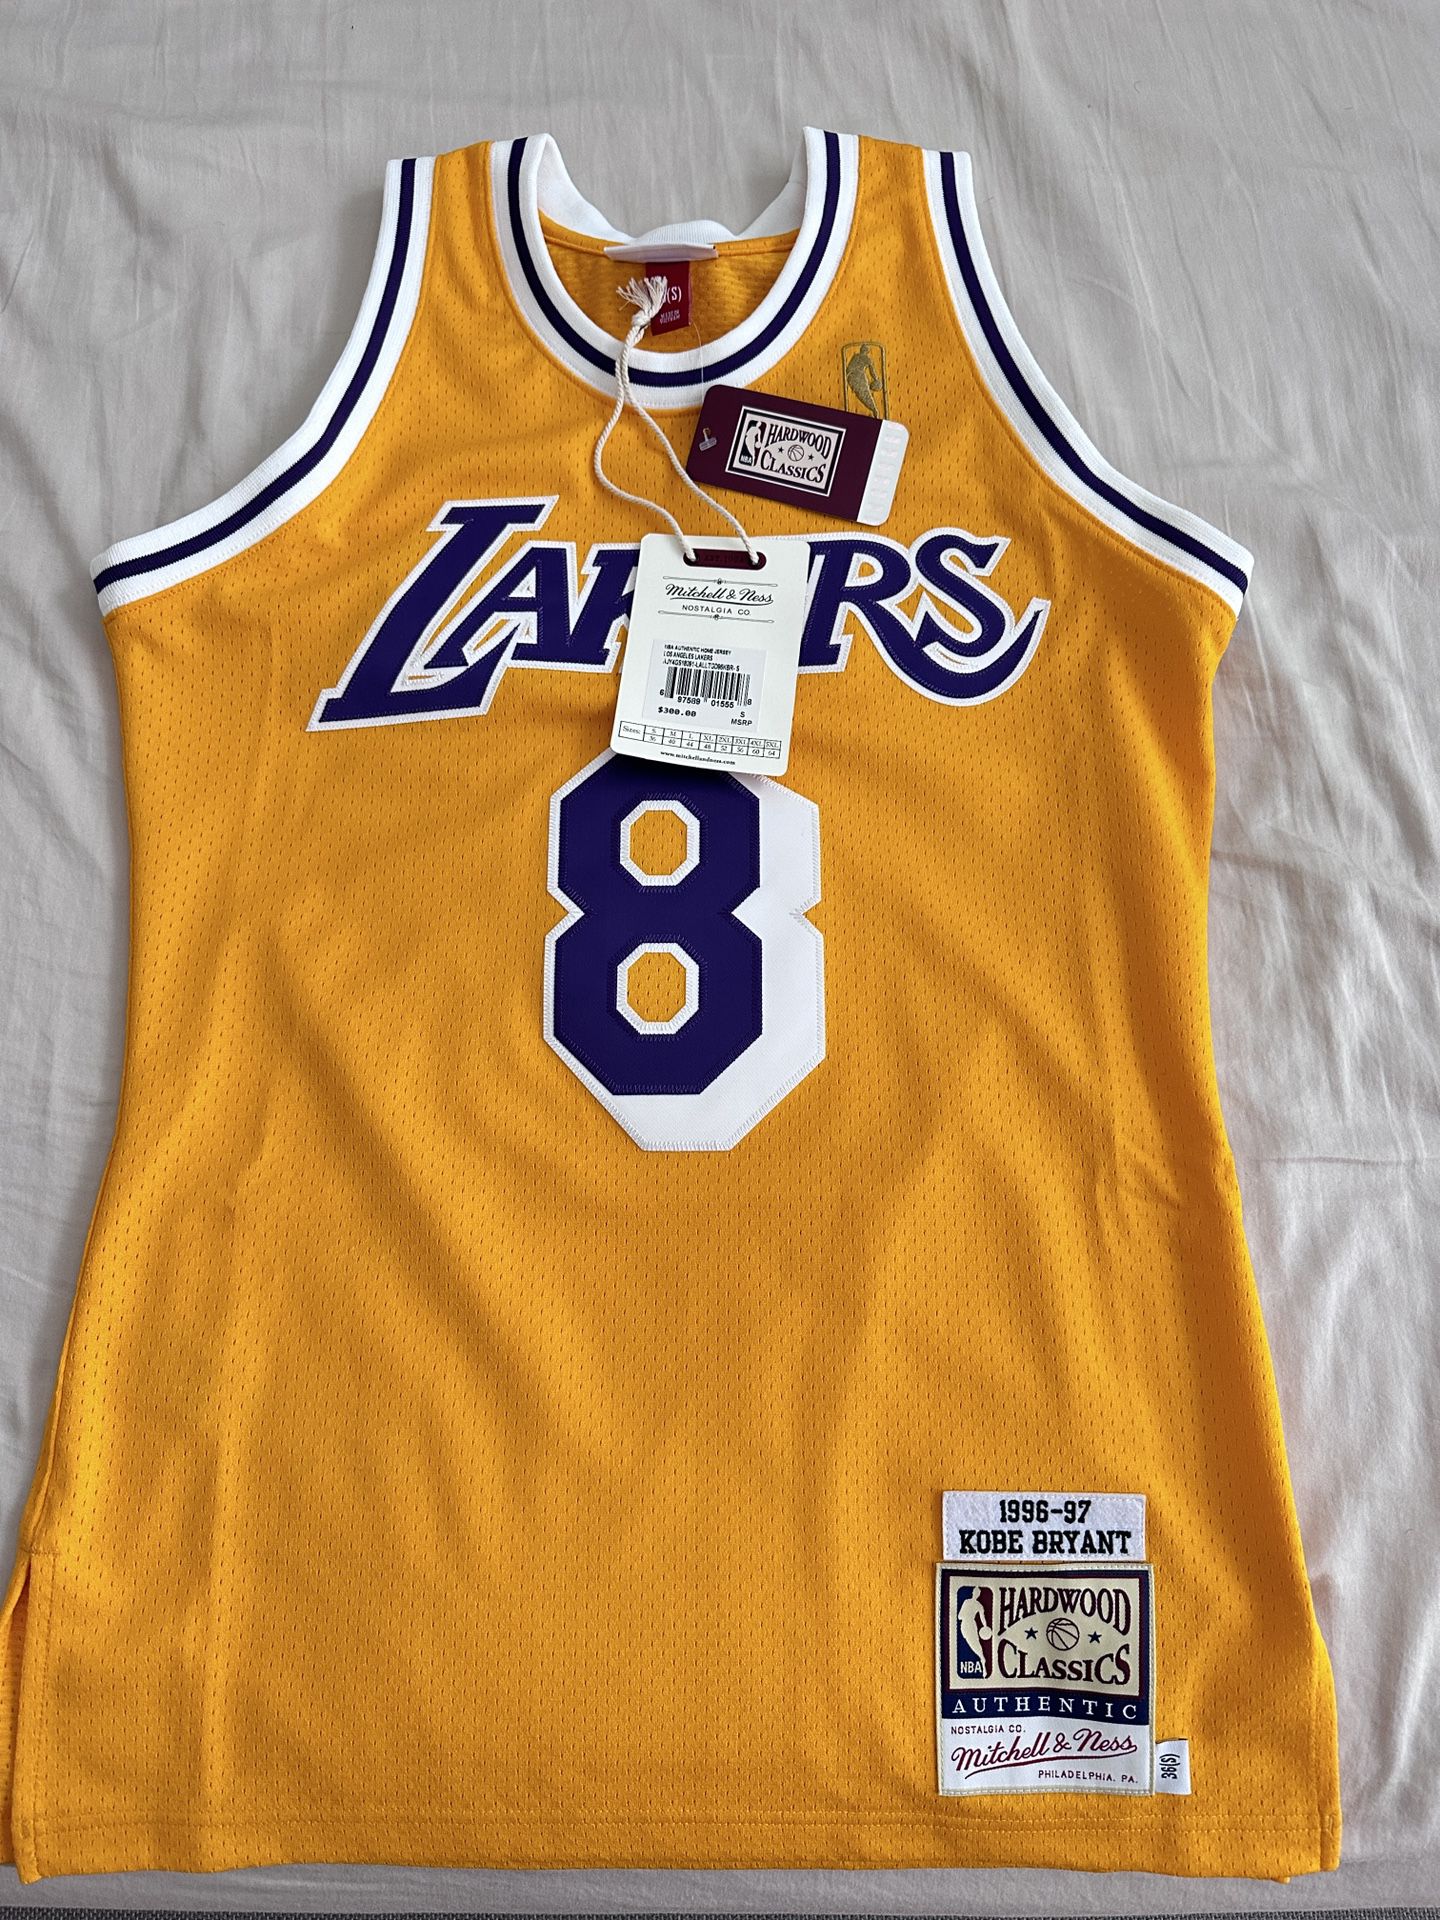 Kobe Bryant #8 Mitchell & Ness 1996-97 AUTHENTIC NBA LA Lakers Jersey 36 S  NEW for Sale in Los Angeles, CA - OfferUp